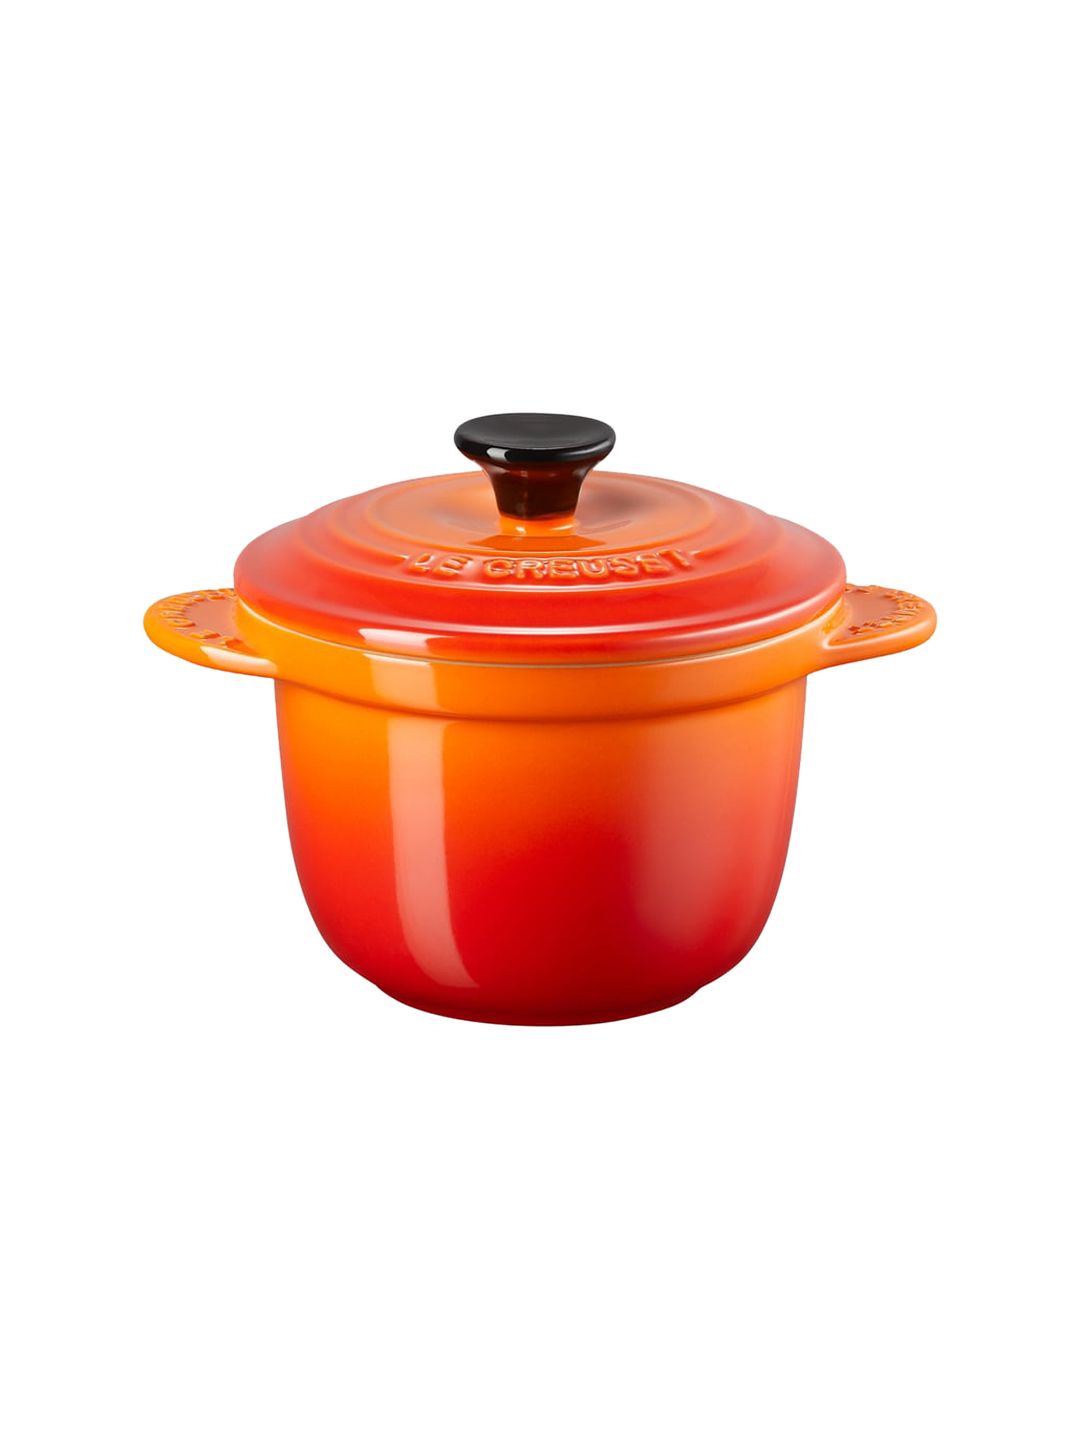 LE CREUSET  Orange Textured Serving Casserole With Lid Price in India